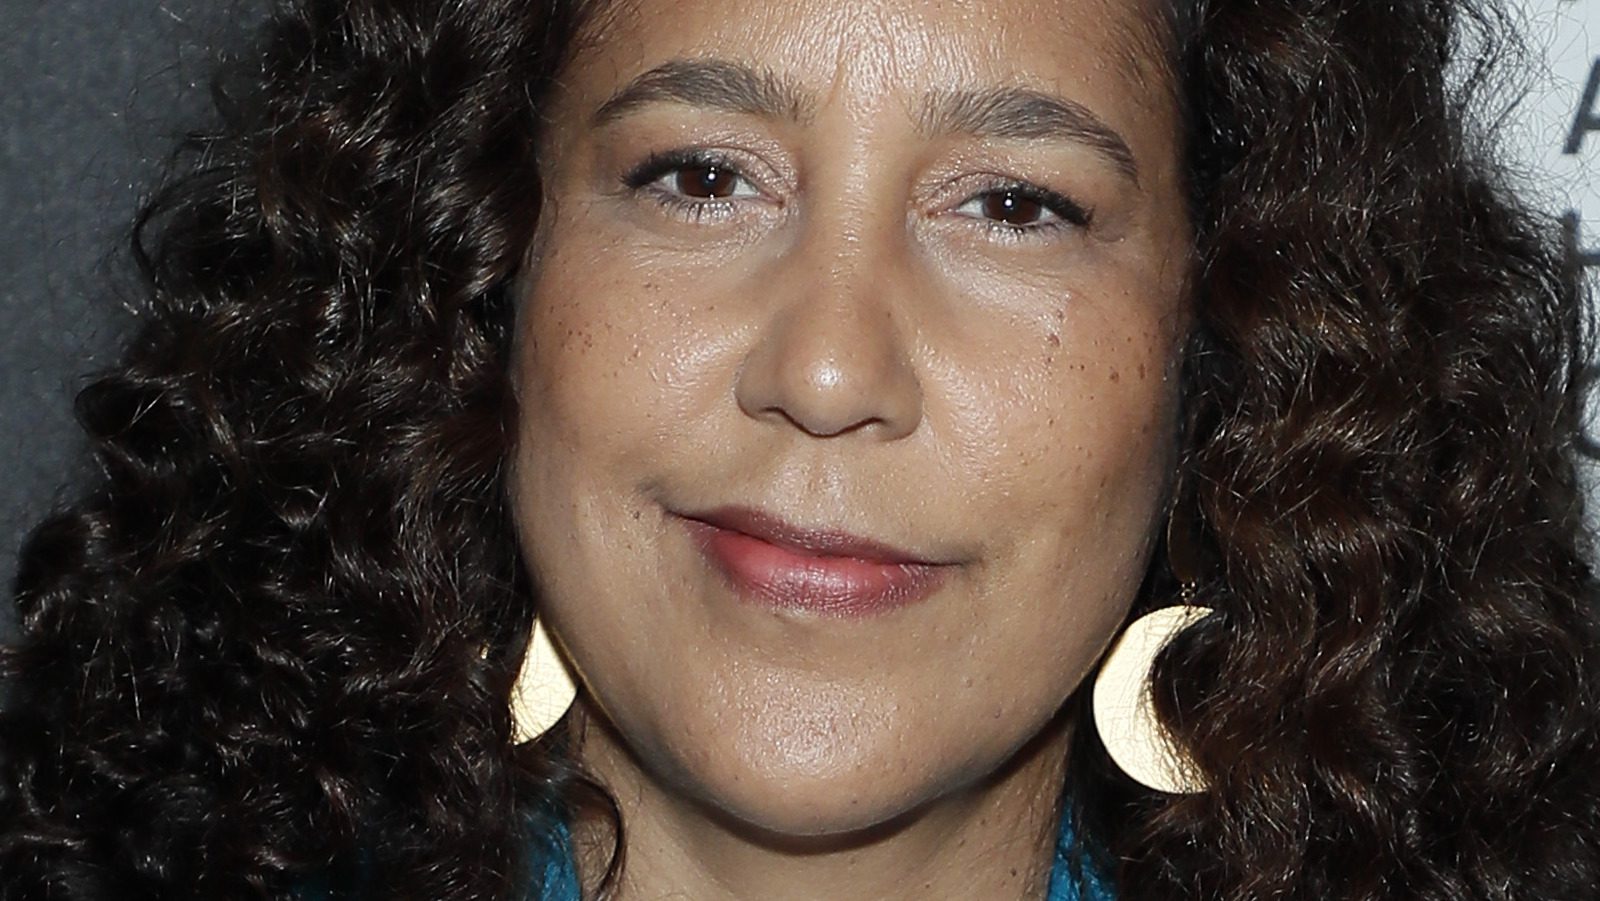 Director Gina Prince-Bythewood Has The Perfect Response To The Woman King Backlash